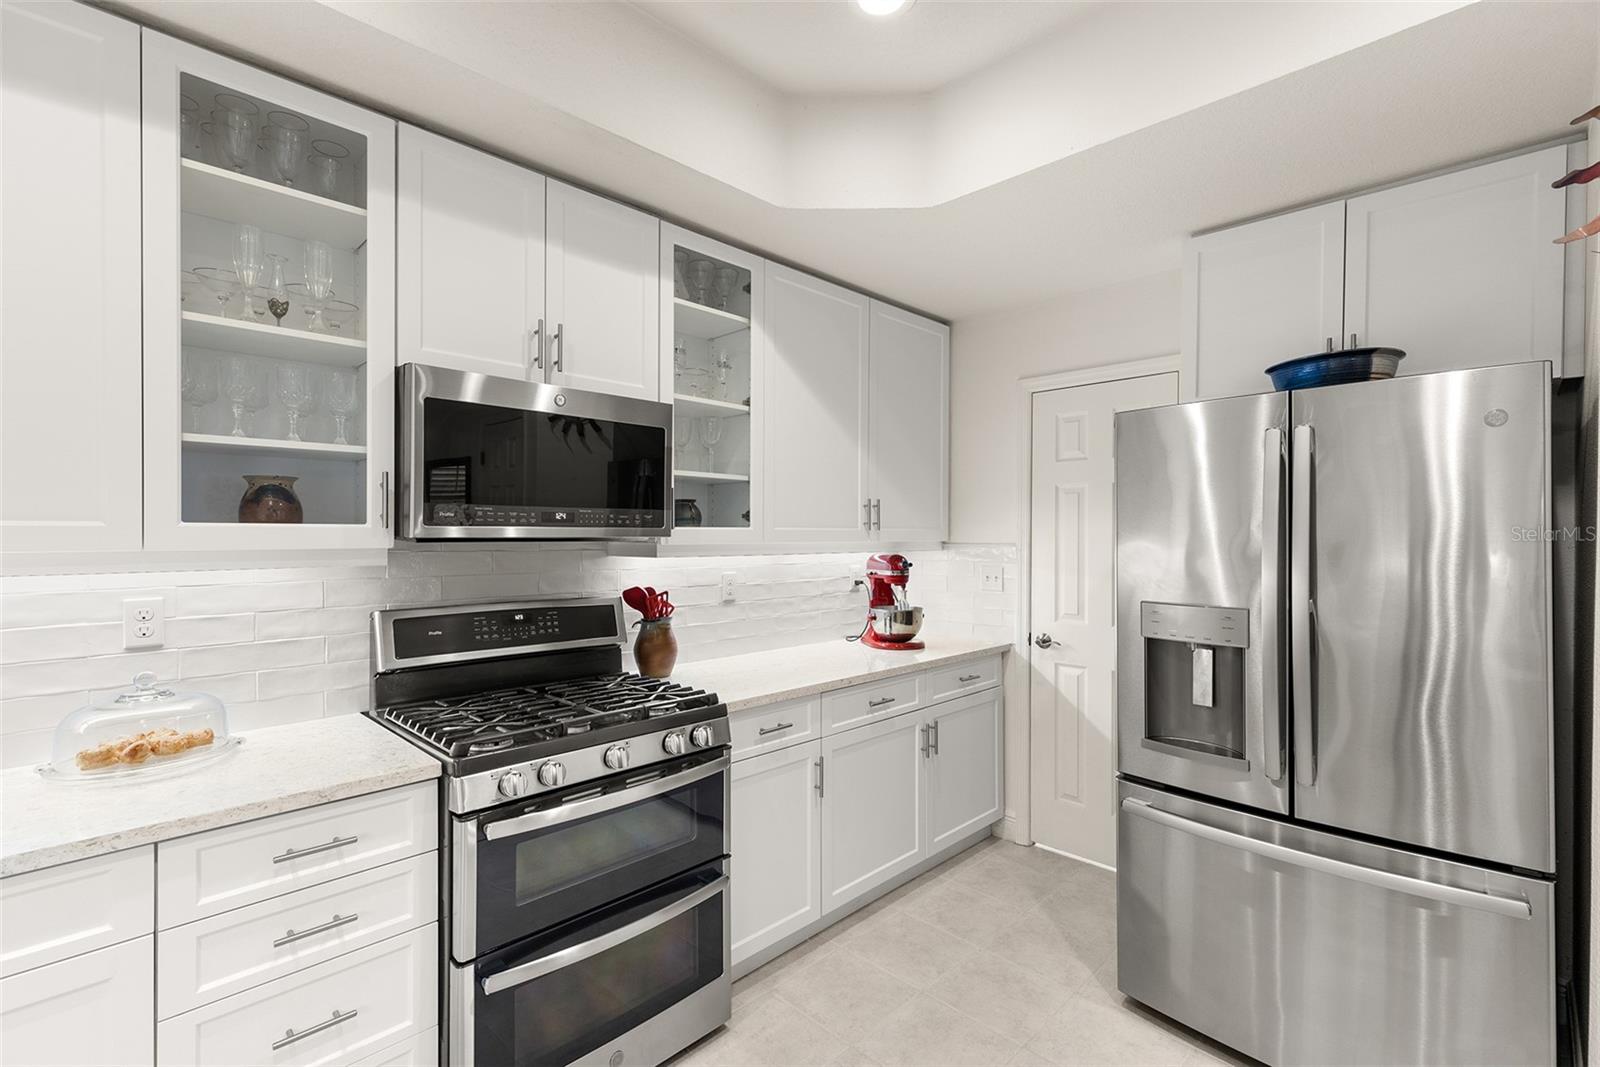 Upgraded stainless steel appliances